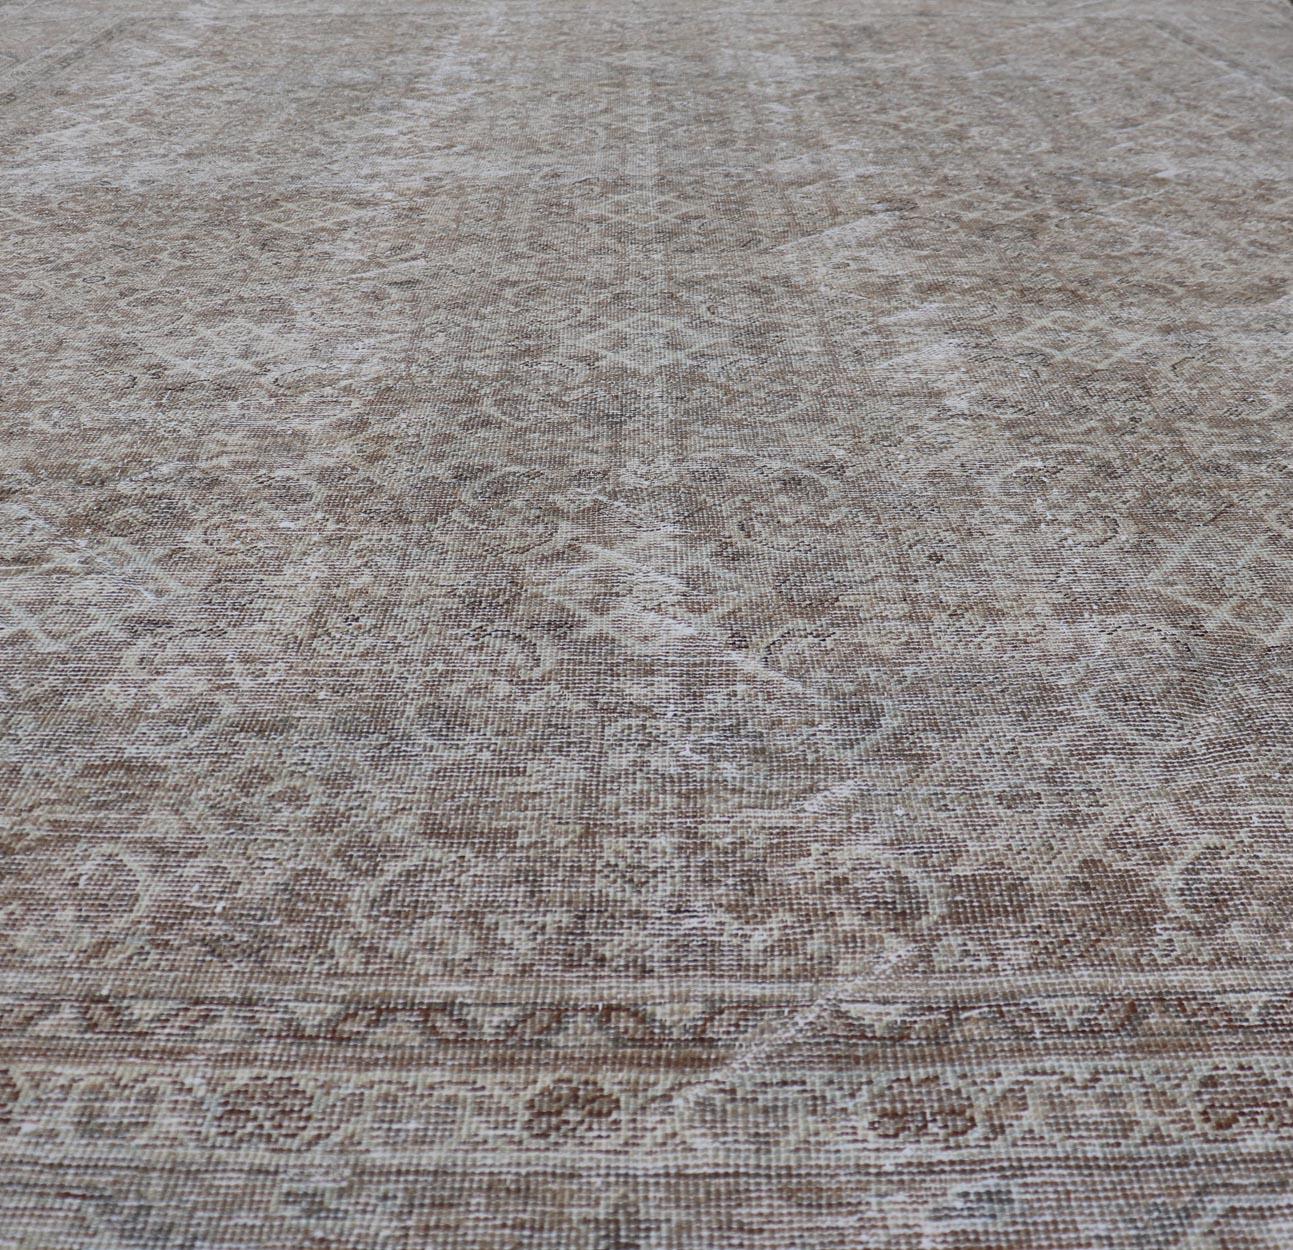 Antique Persian Distressed Mahal Rug in Warm Earthy Tones with All-Over Design 1